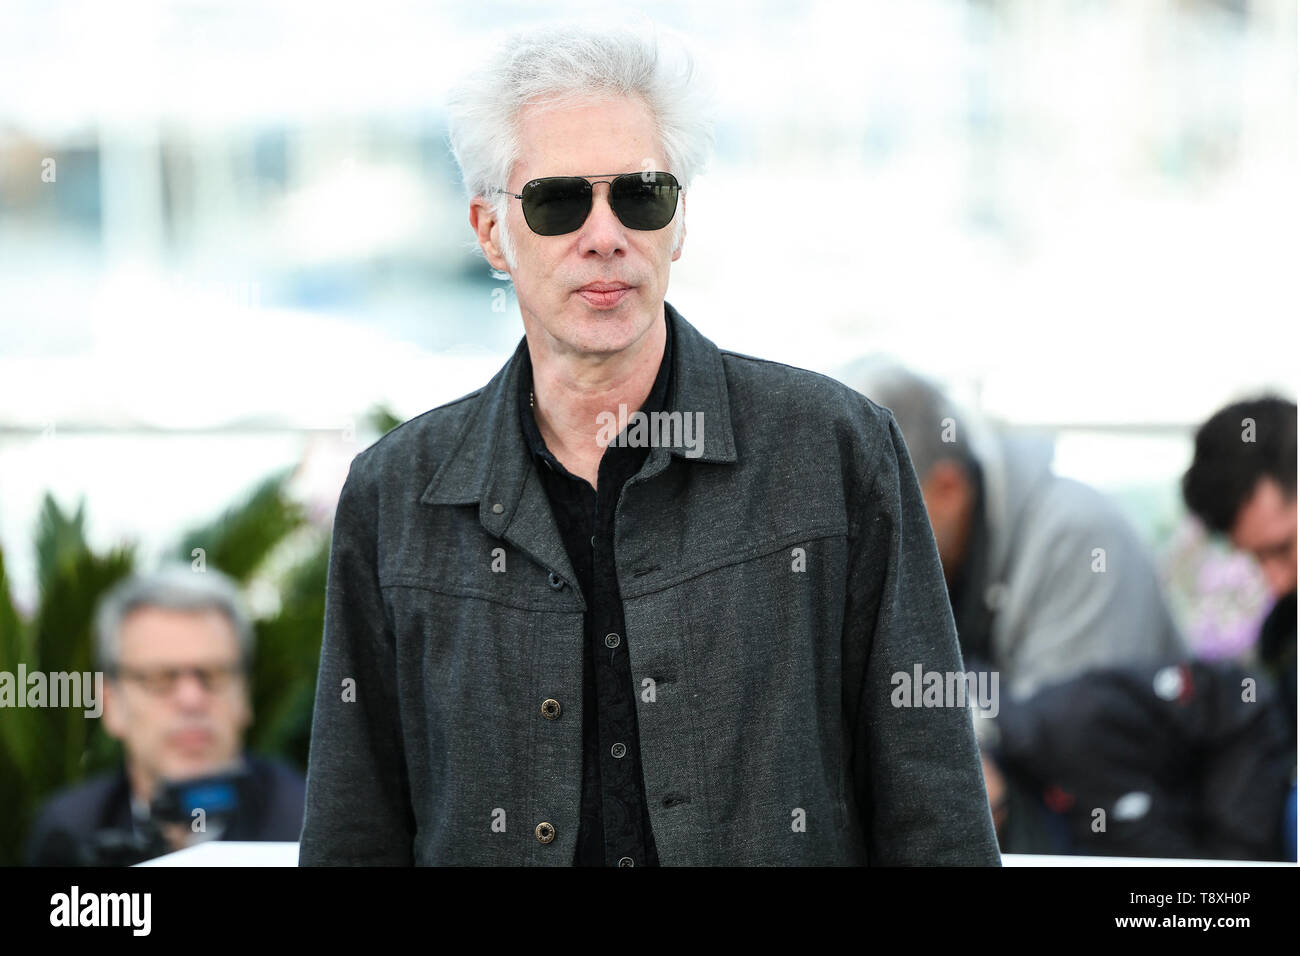 Cannes, France. 15th May, 2019. CANNES - MAY 15: Jim JARMUSCH on THE DEAD DON'T DIE Photocall during the 2019 Cannes Film Festival on May 15, 2019 at Palais des Festivals in Cannes, France. (Photo by Lyvans Boolaky/imageSPACE) Credit: Imagespace/Alamy Live News Stock Photo